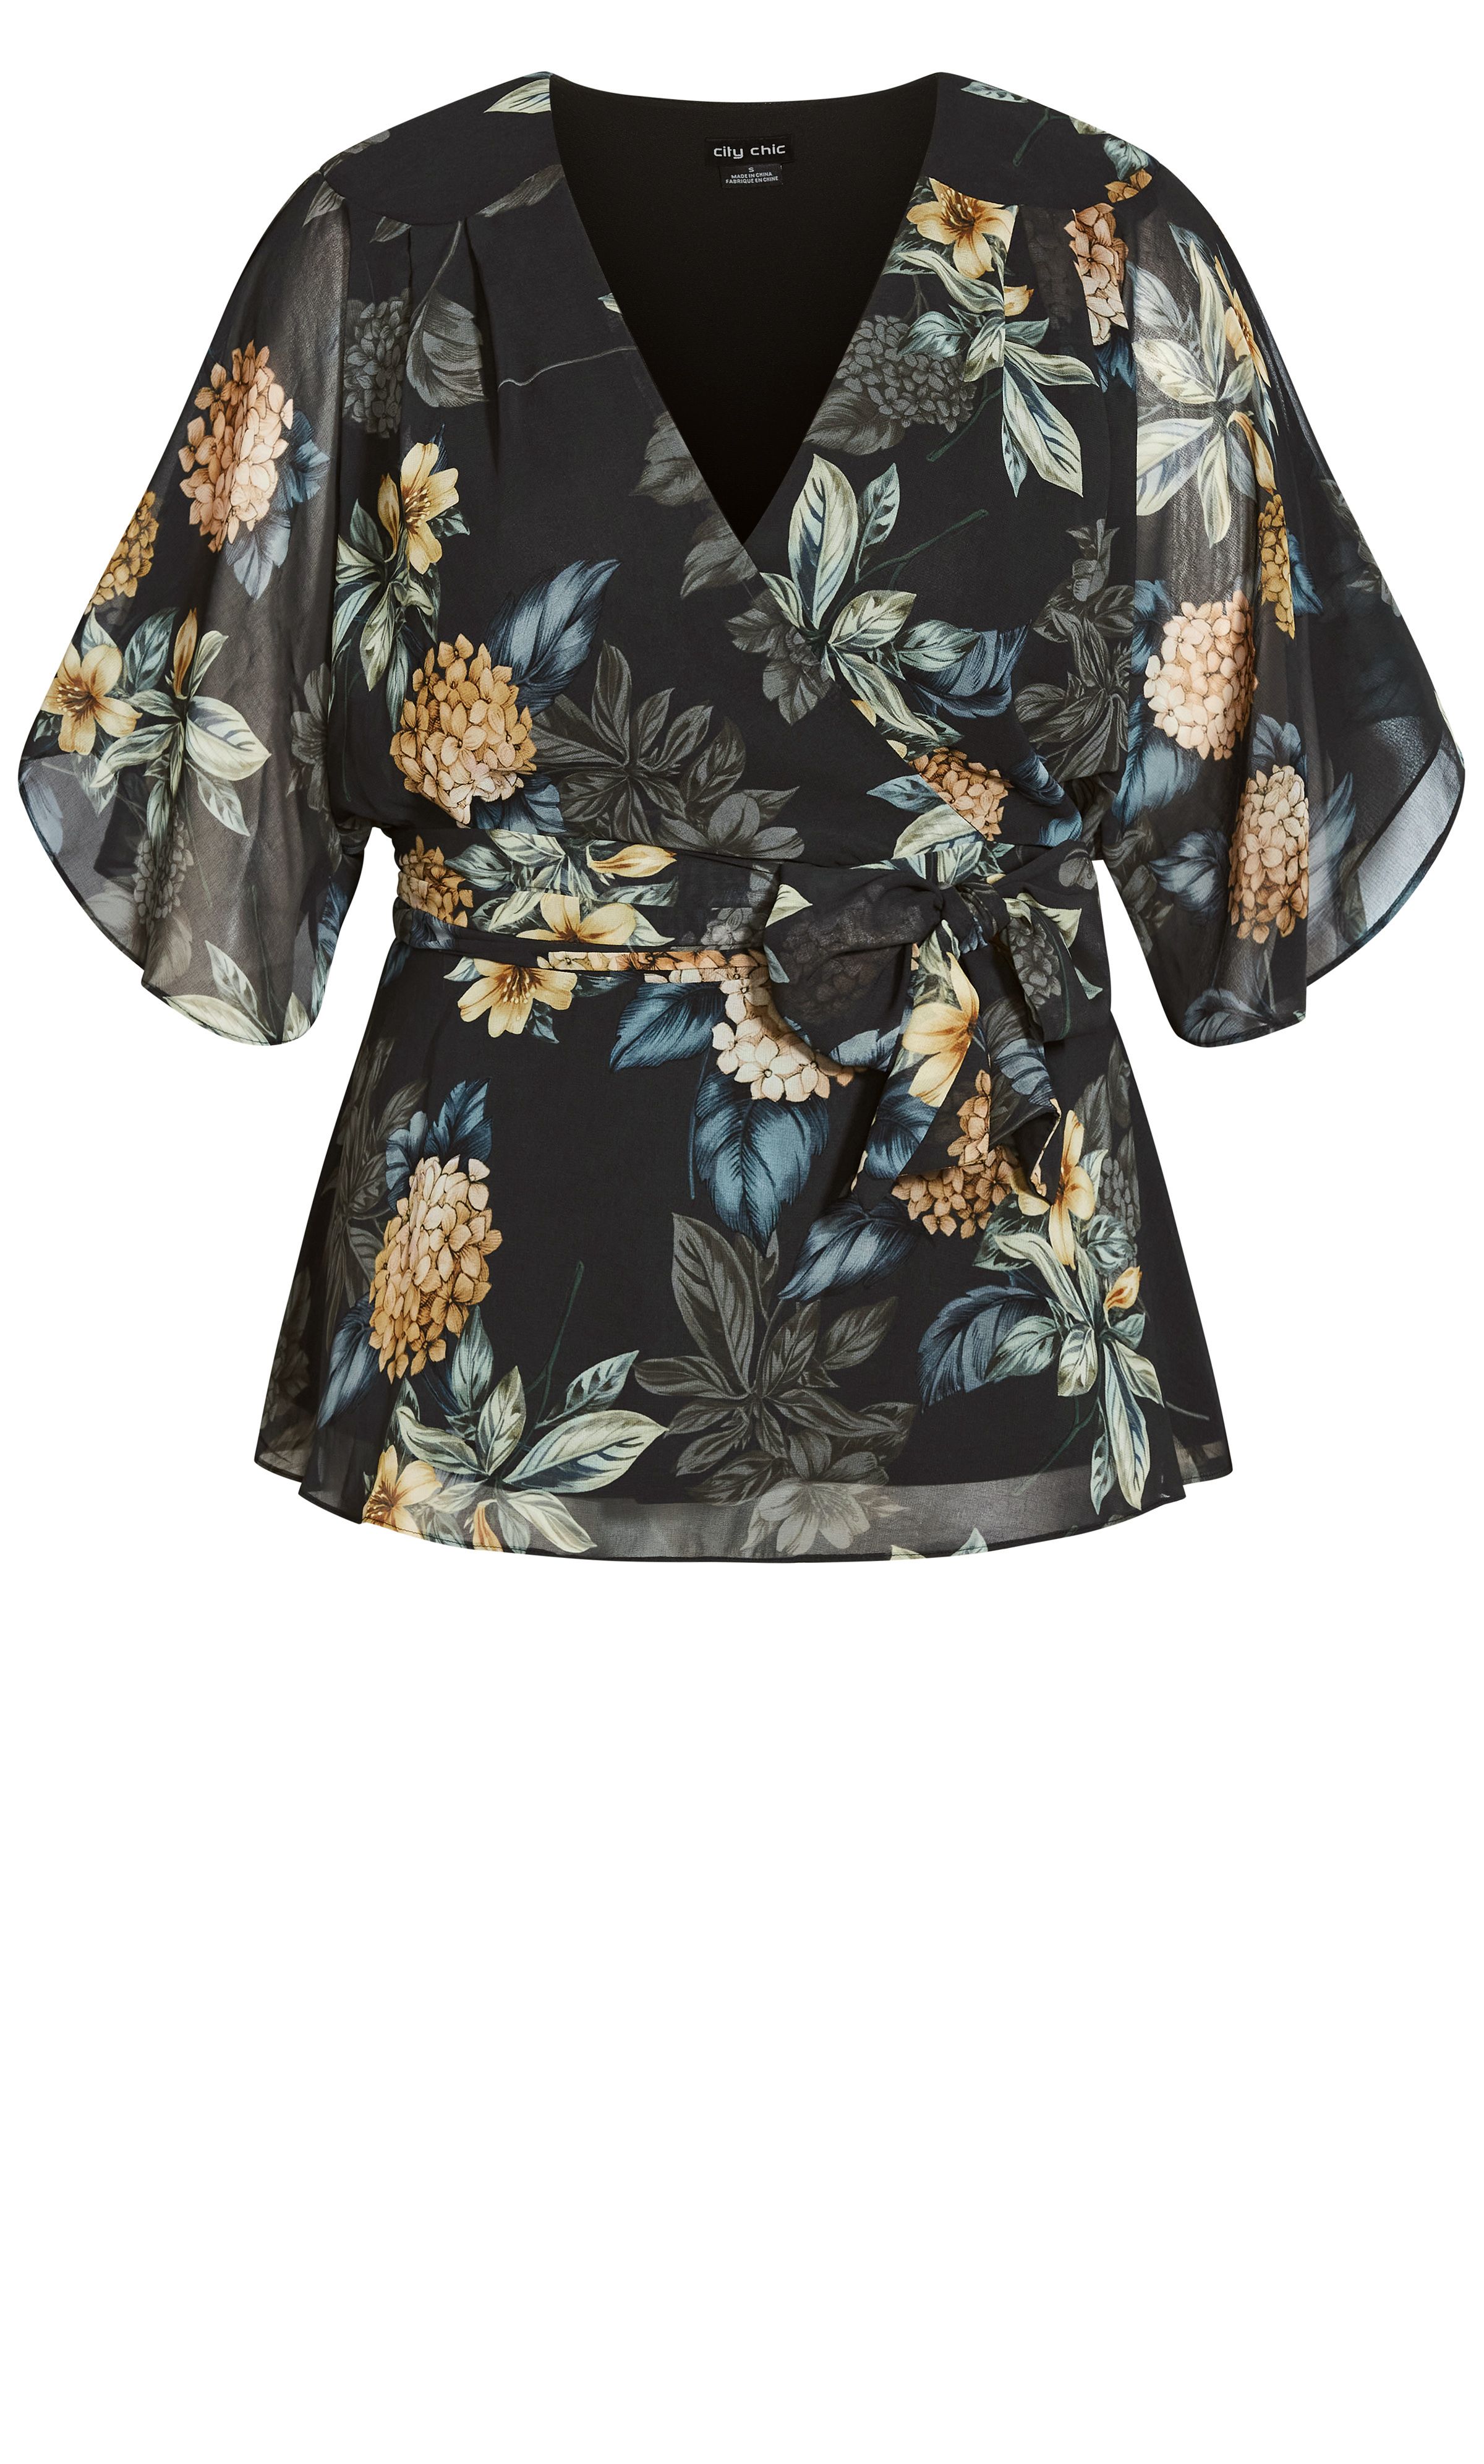 Wrap your curves in lavish florals with the Golden Hydrangea Shirt. With a flattering faux wrap finish and feminine flare sleeves, you'll be rocking this statement top all year round. Key Features Include: - Faux wrap V-neckline - Three-quarter flared sleeves - Elasticated back waist - Fit & flare silhouette - Attached self-tie waist belt - Pull over style - Fully lined - Hip length Style this with a trendy block heel and your favourite dark jeans for a classic day-to-night look.